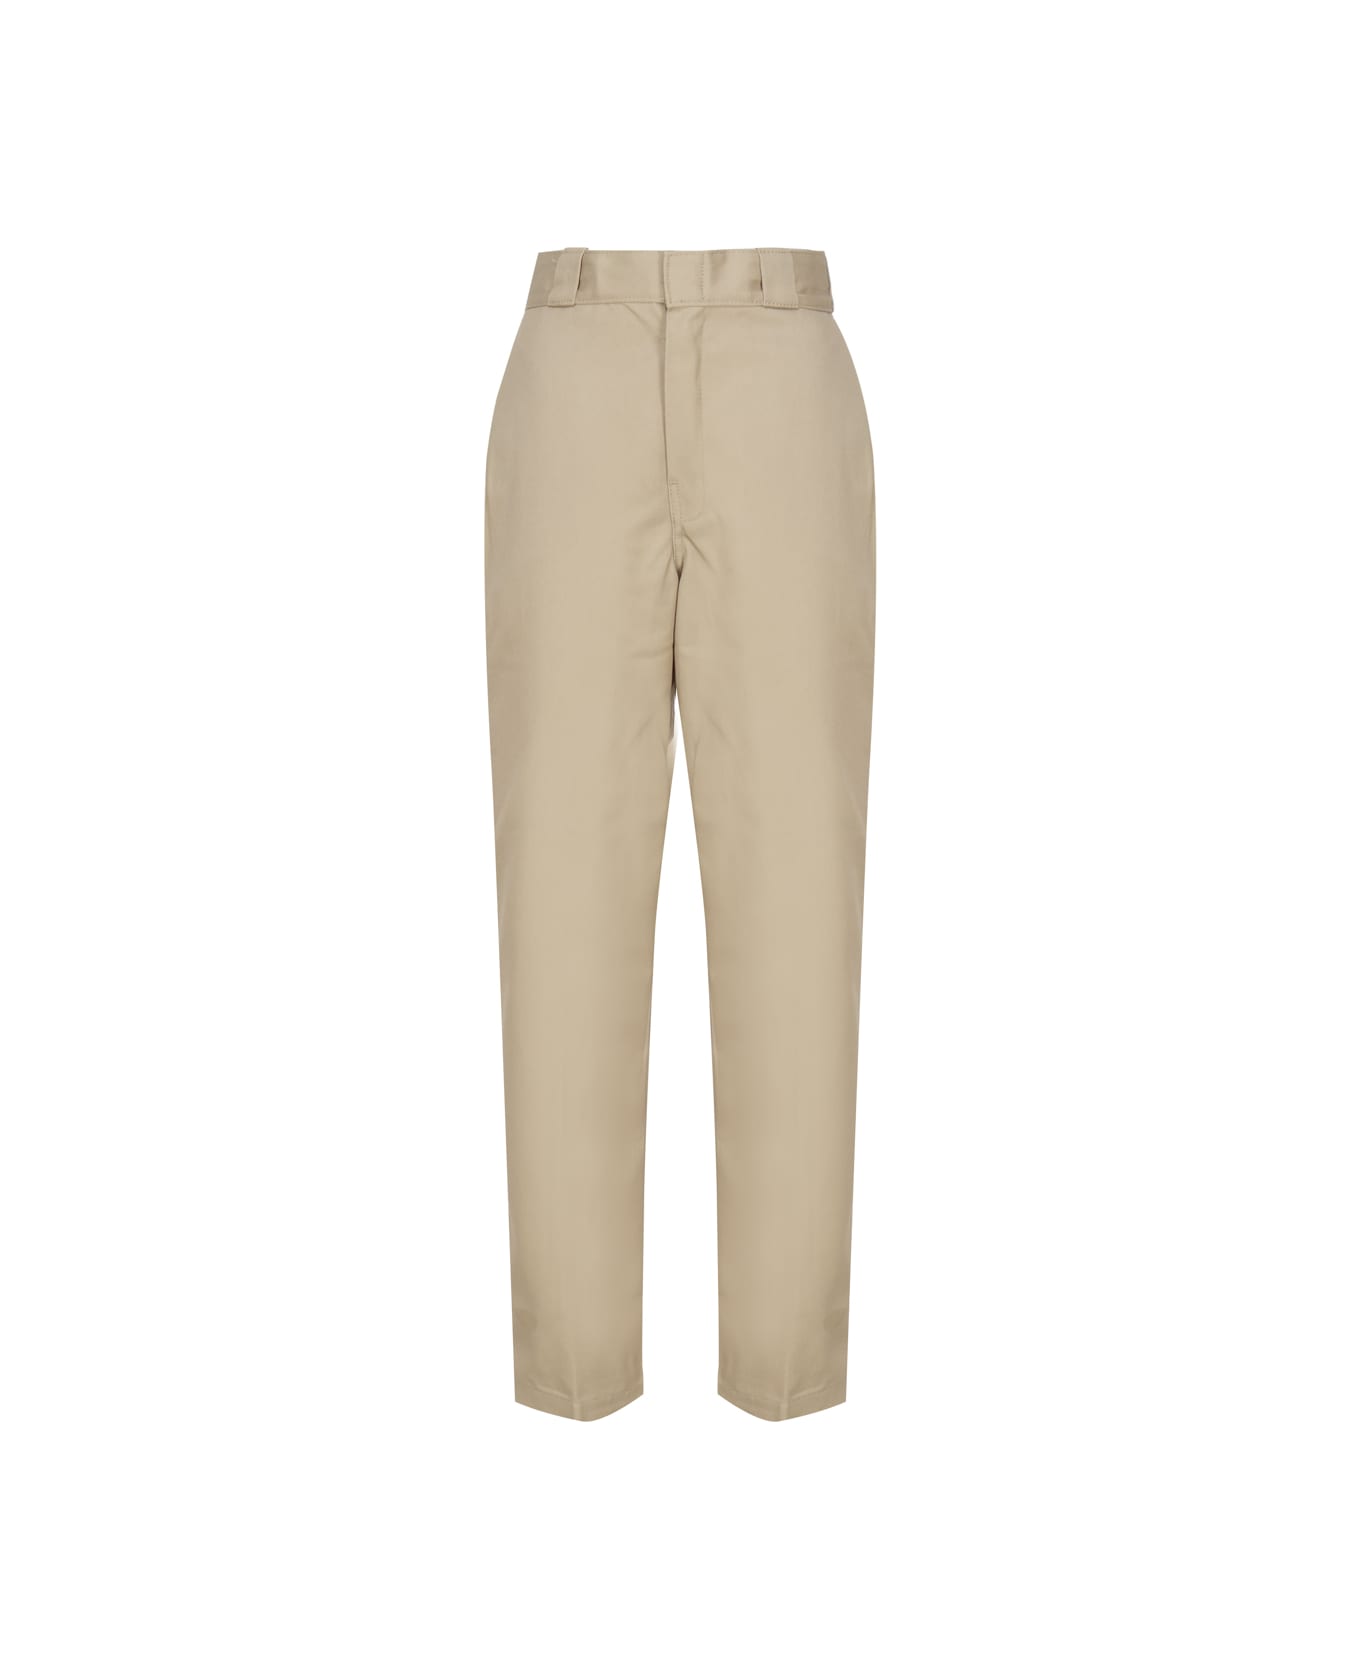 Dickies Straight Leg Cotton Trousers - Beige